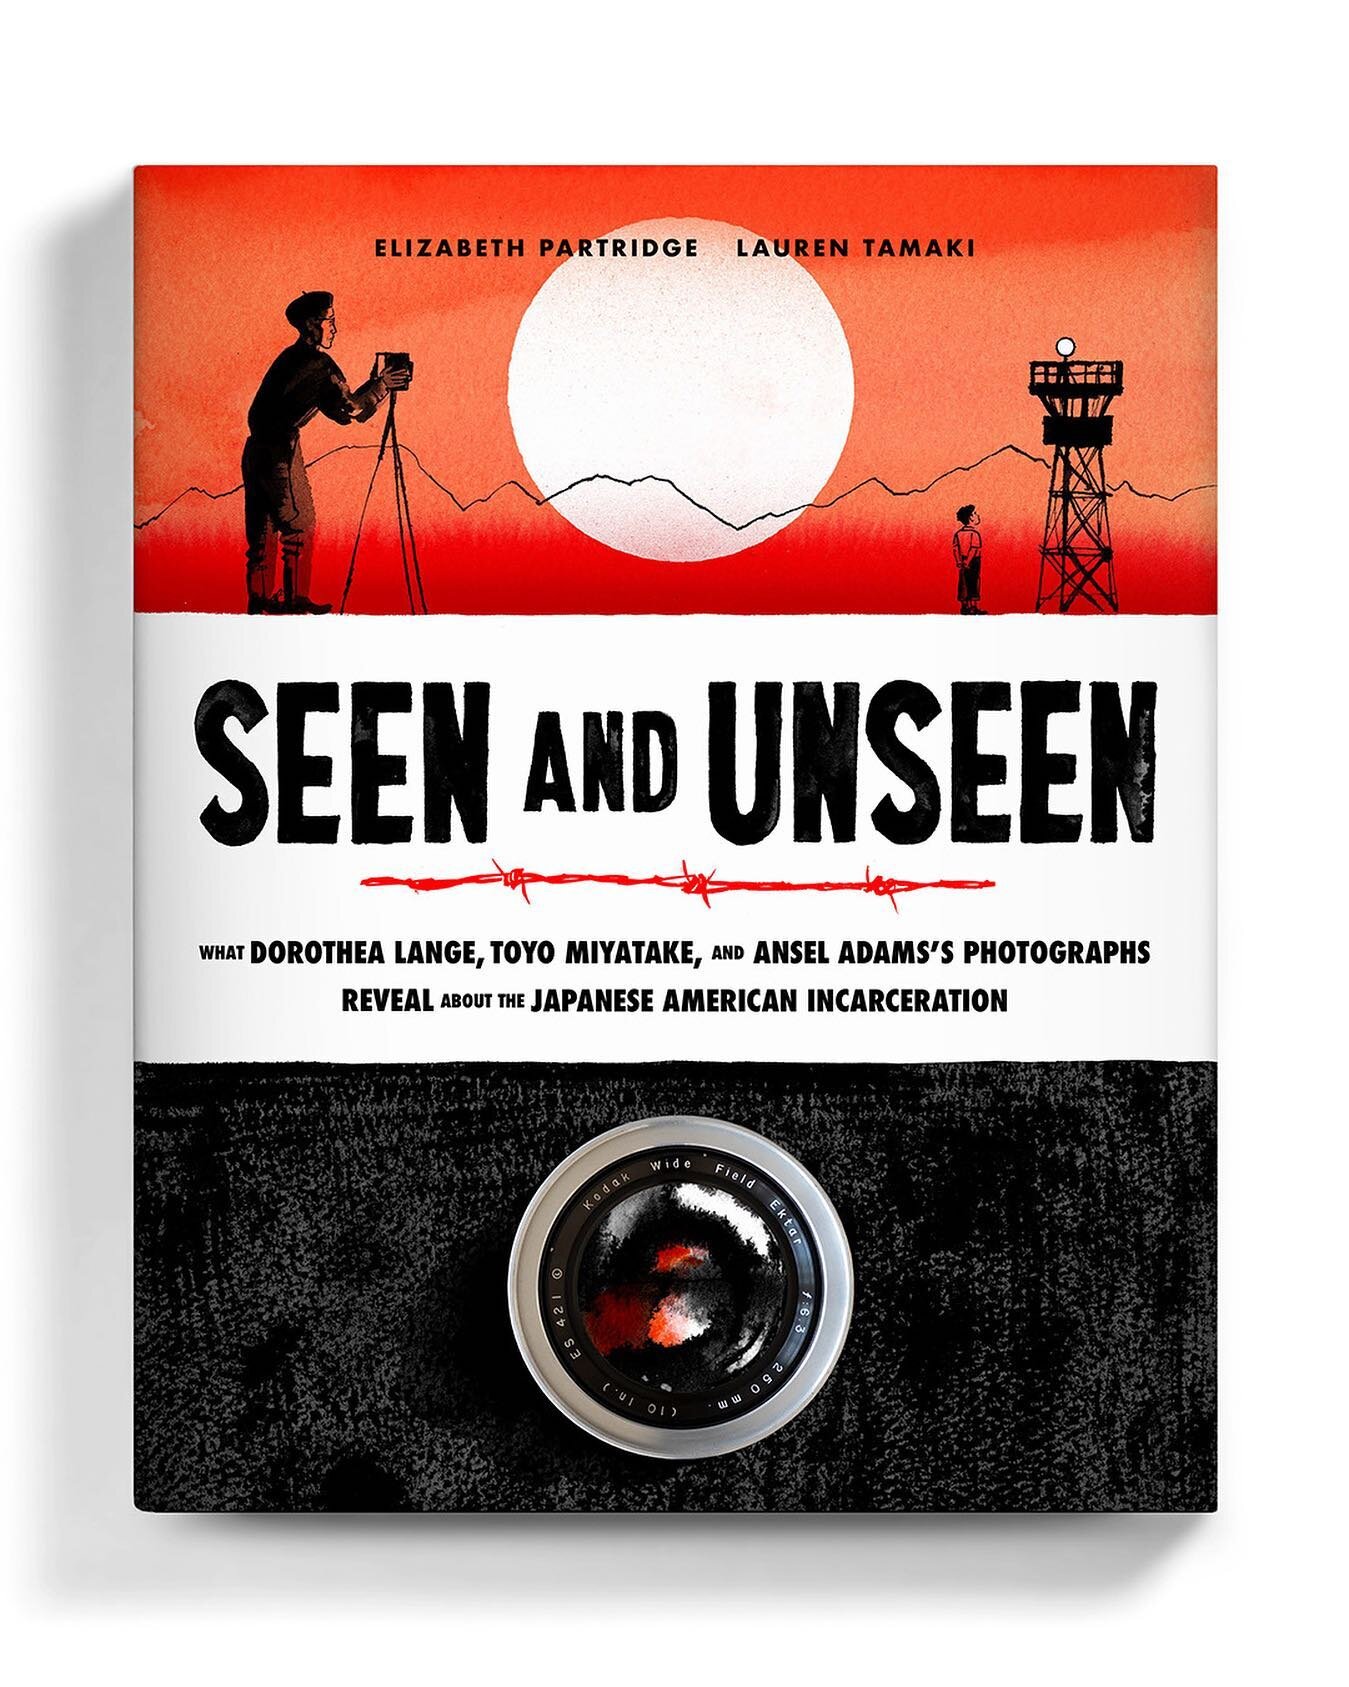 SEEN AND UNSEEN: What Dorothea Lange, Toyo Miyatake and Ansel Adams&rsquo;s Photographs Reveal About the Japanese American Incarcertion (@chroniclebooks, Oct 25, 2022) ⚫️
-
I&rsquo;m at ALA (booth 1413) this weekend with SEEN AND UNSEEN, my labour of